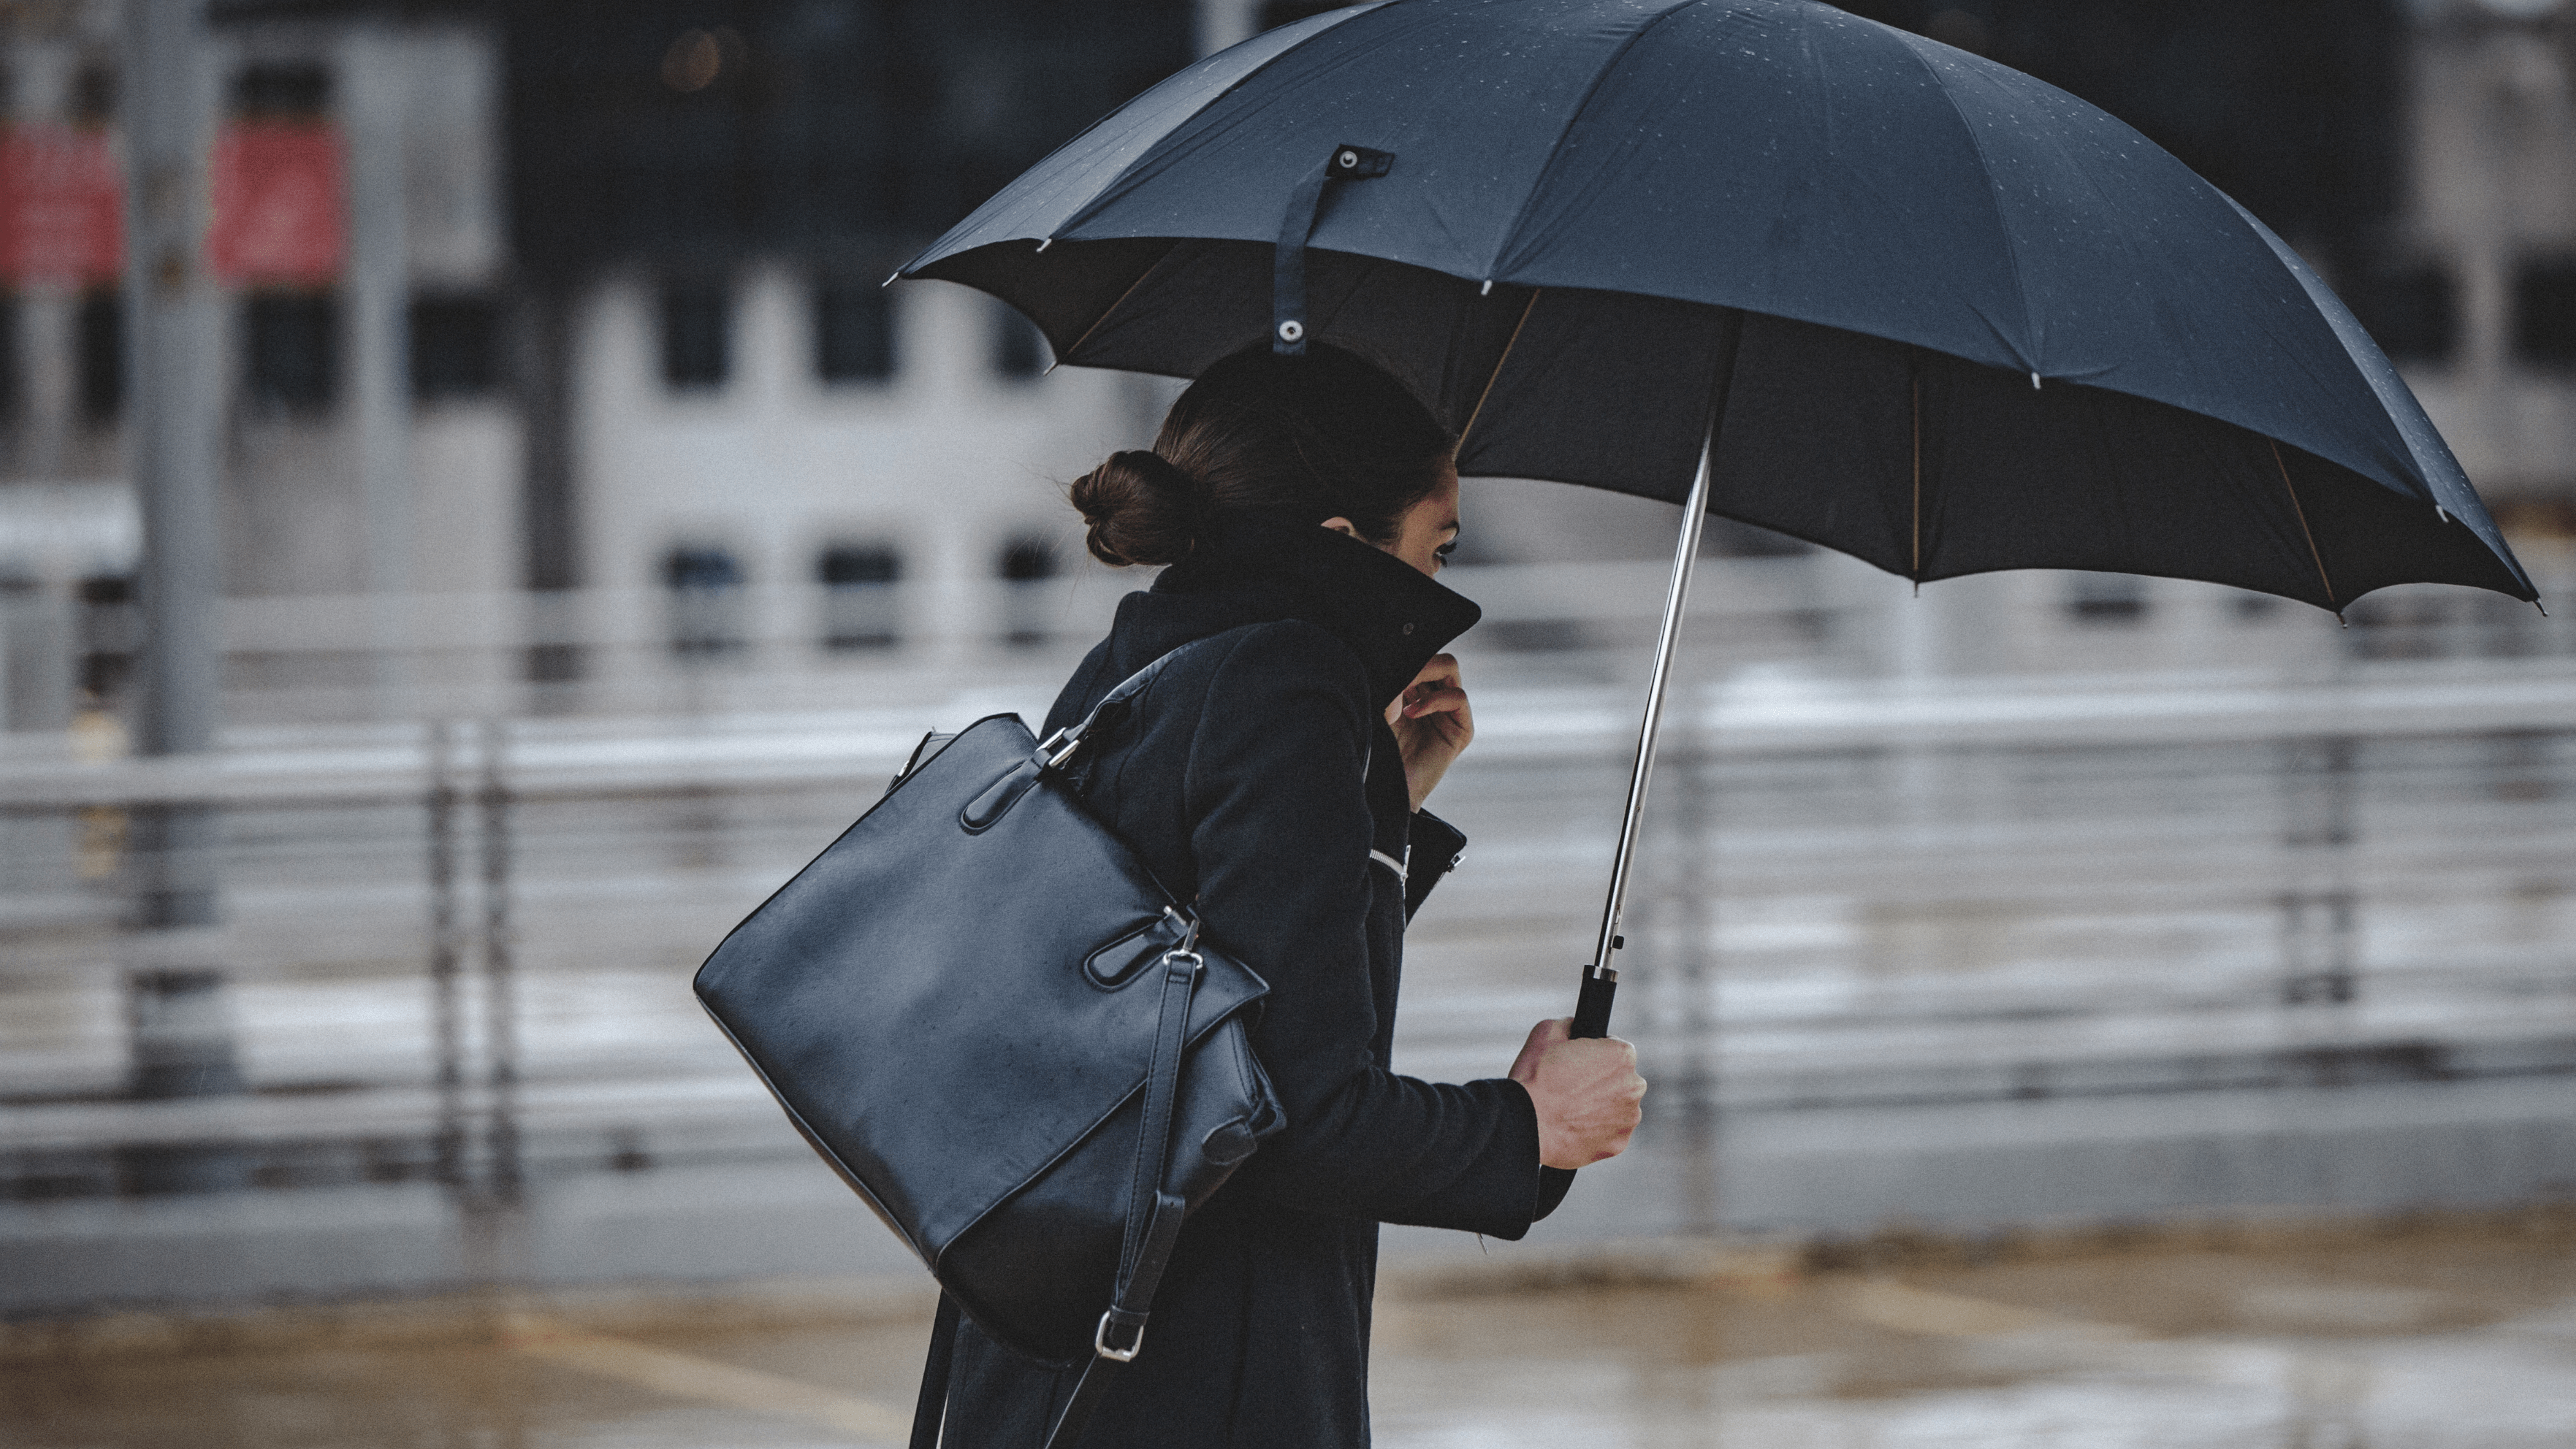 A woman walks down the street, holding an umbrella and struggling with the wind on a cold and rainy day.